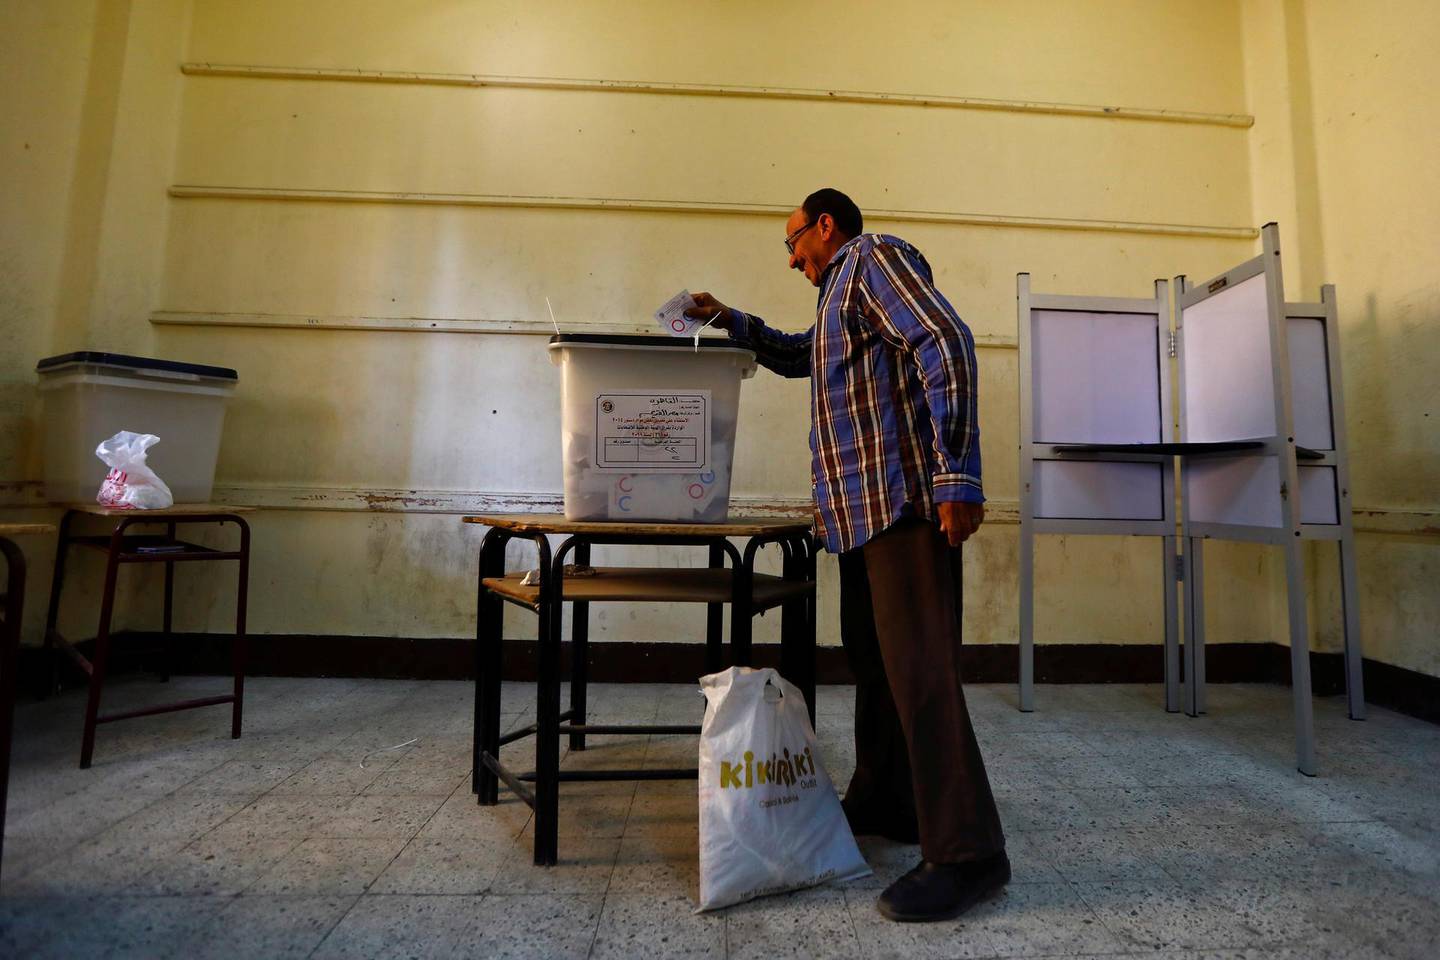 A man casts his vote during the second day of the referendum on draft constitutional amendments, at a polling station in Cairo, Egypt April 21, 2019. REUTERS/Amr Abdallah Dalsh